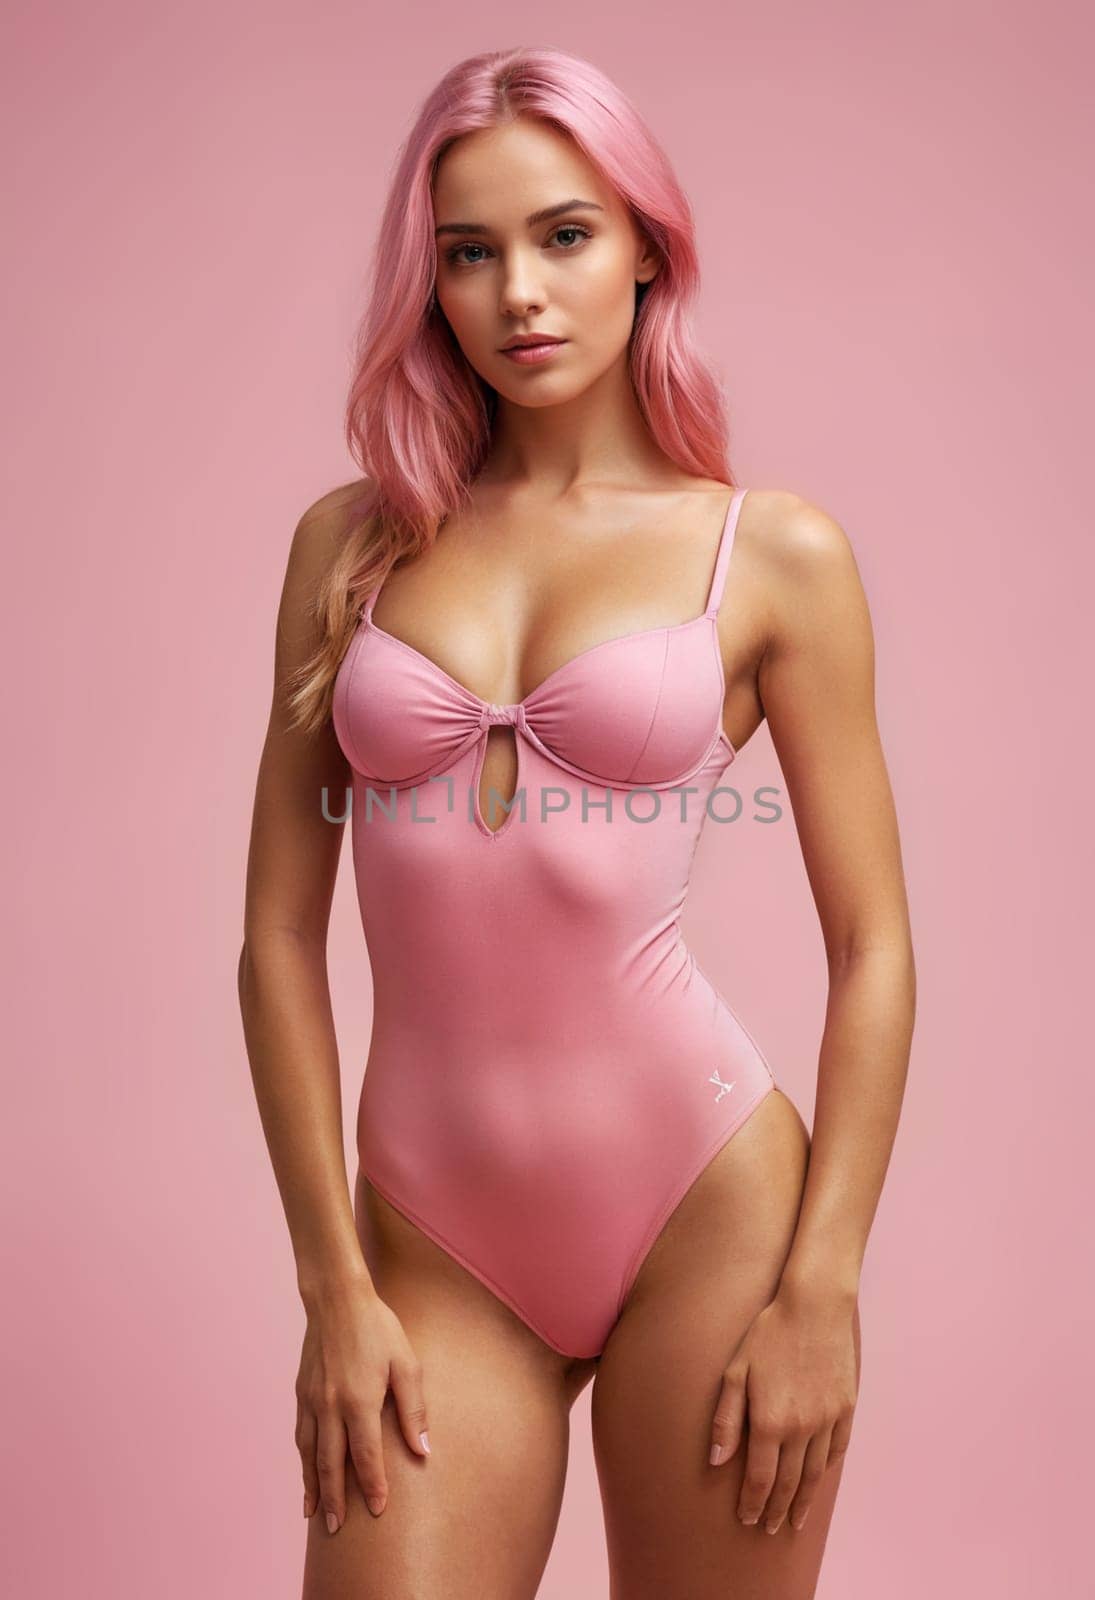 Model in pink swimsuit against a matching background, epitomizing pink fashion.